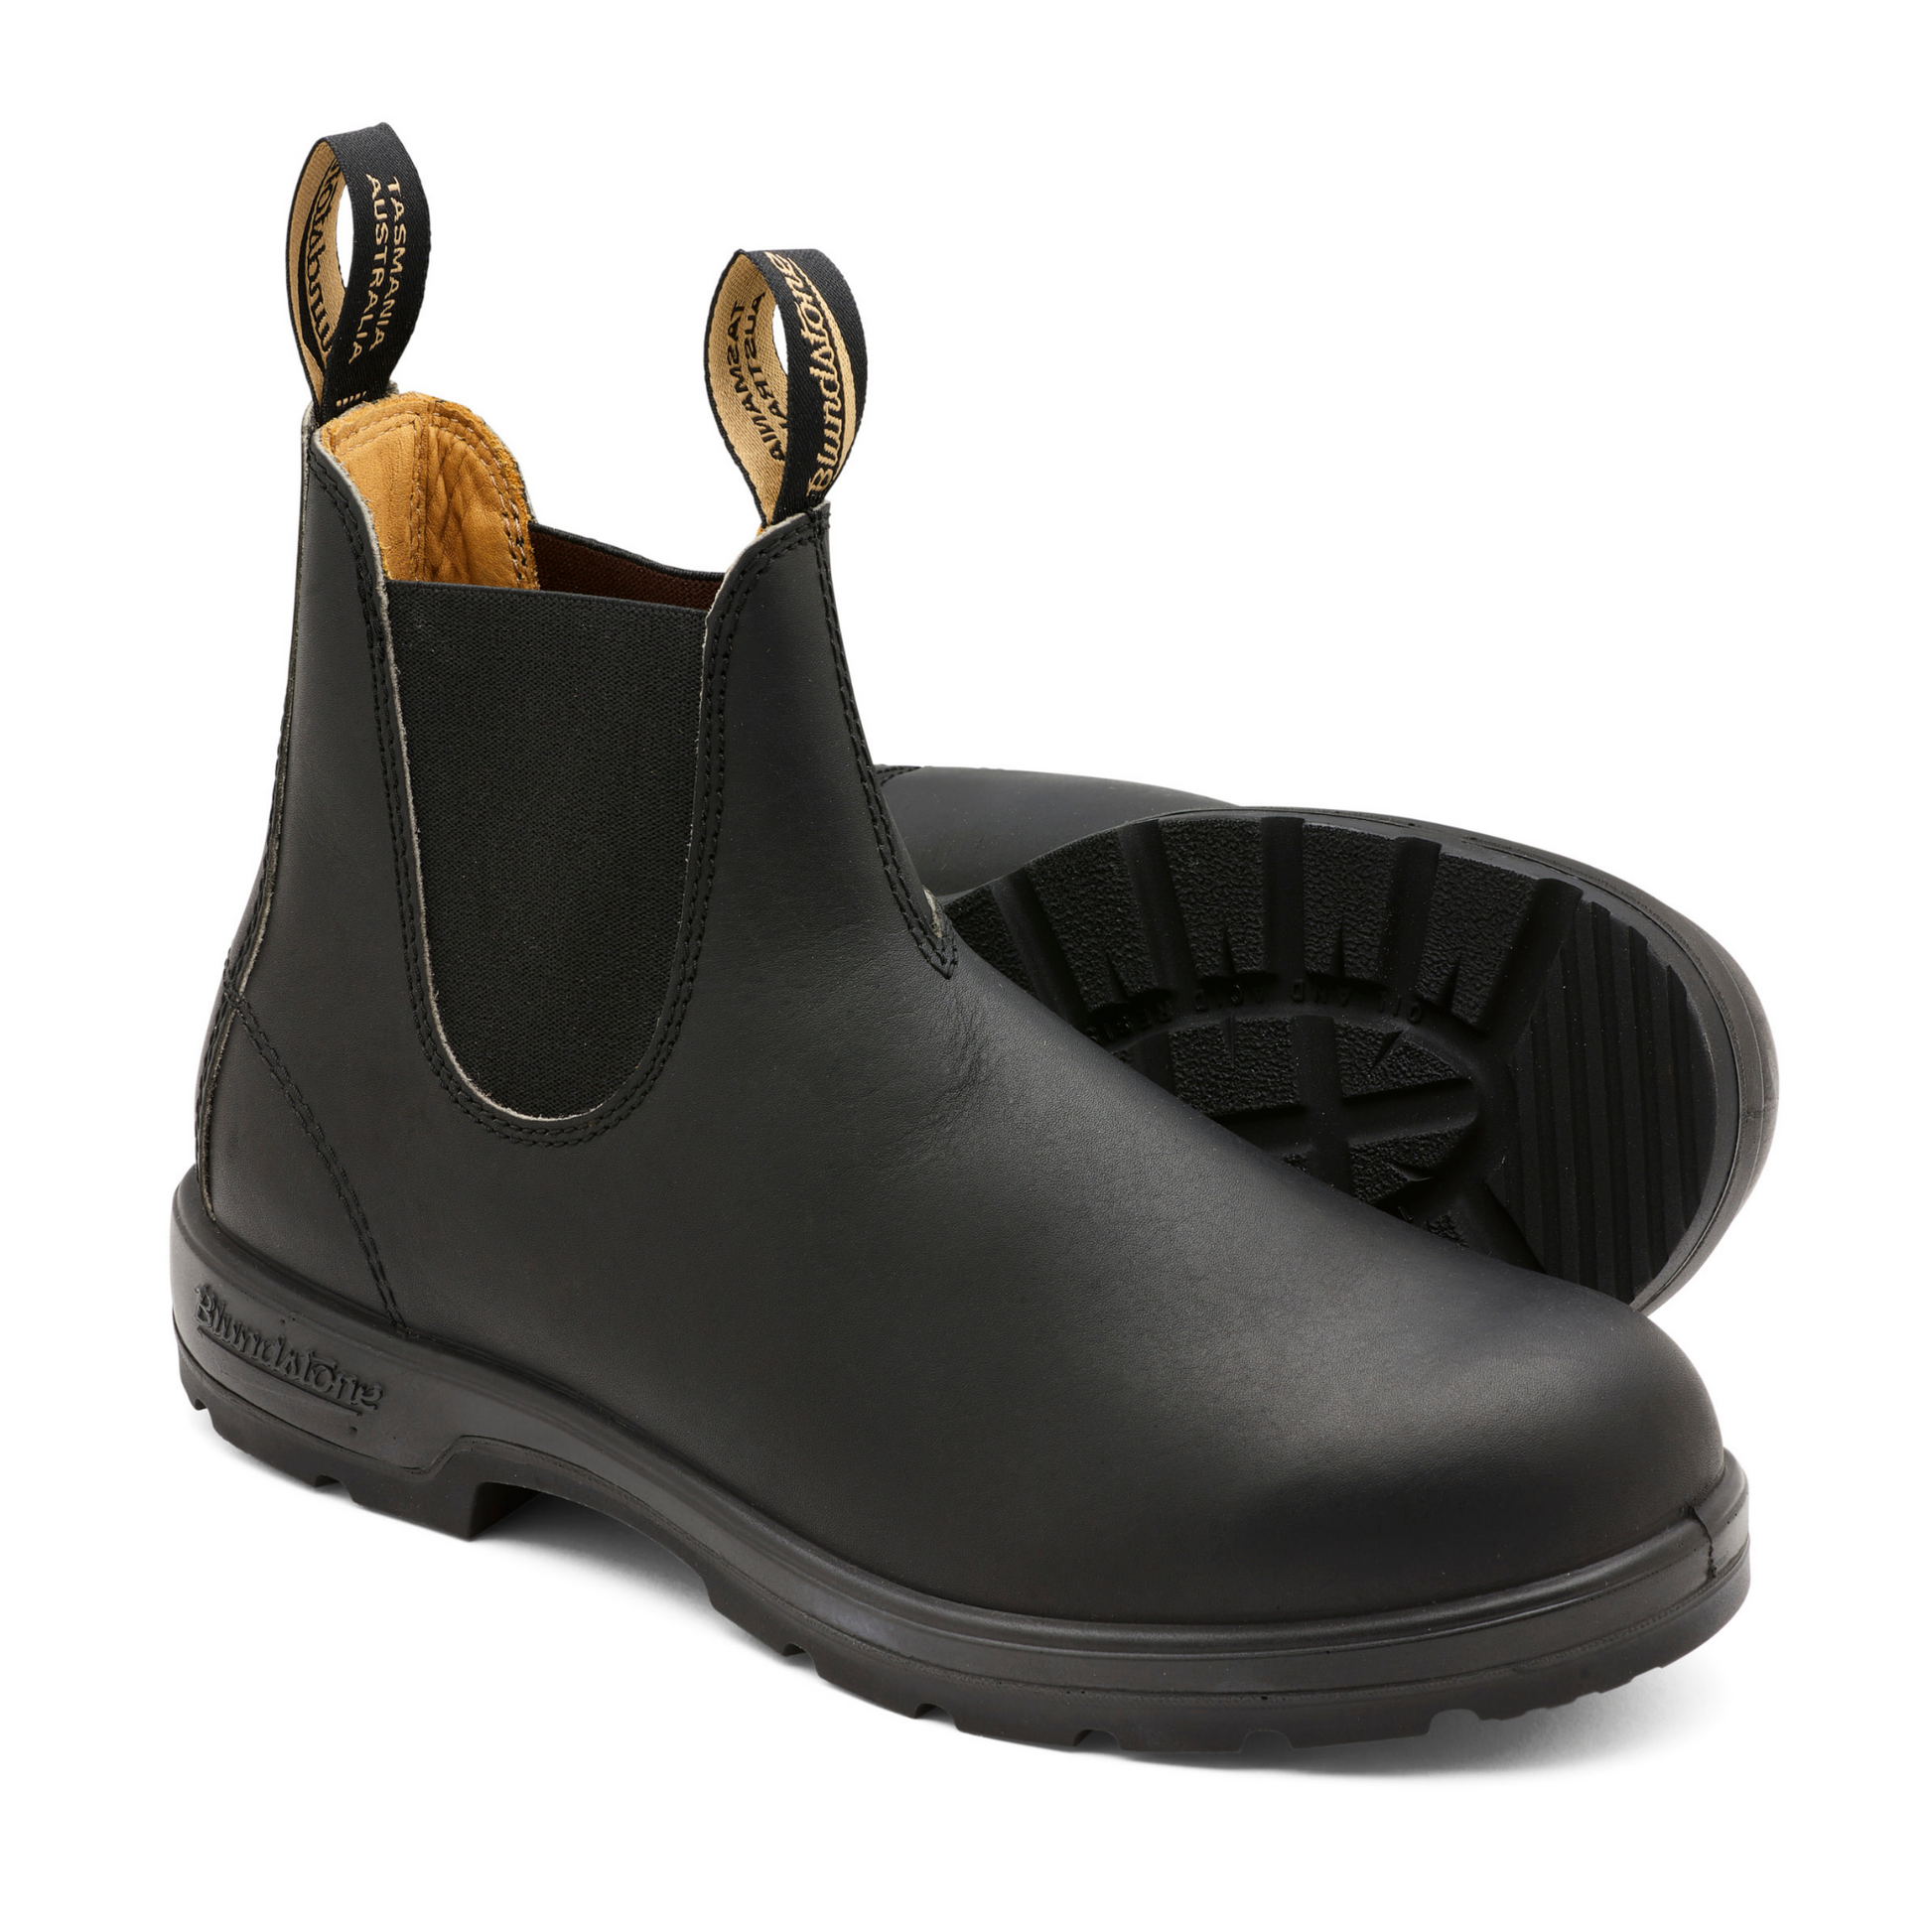 A pair of unisex, leather over-the-ankle height boots with tan coloured leather interior lining